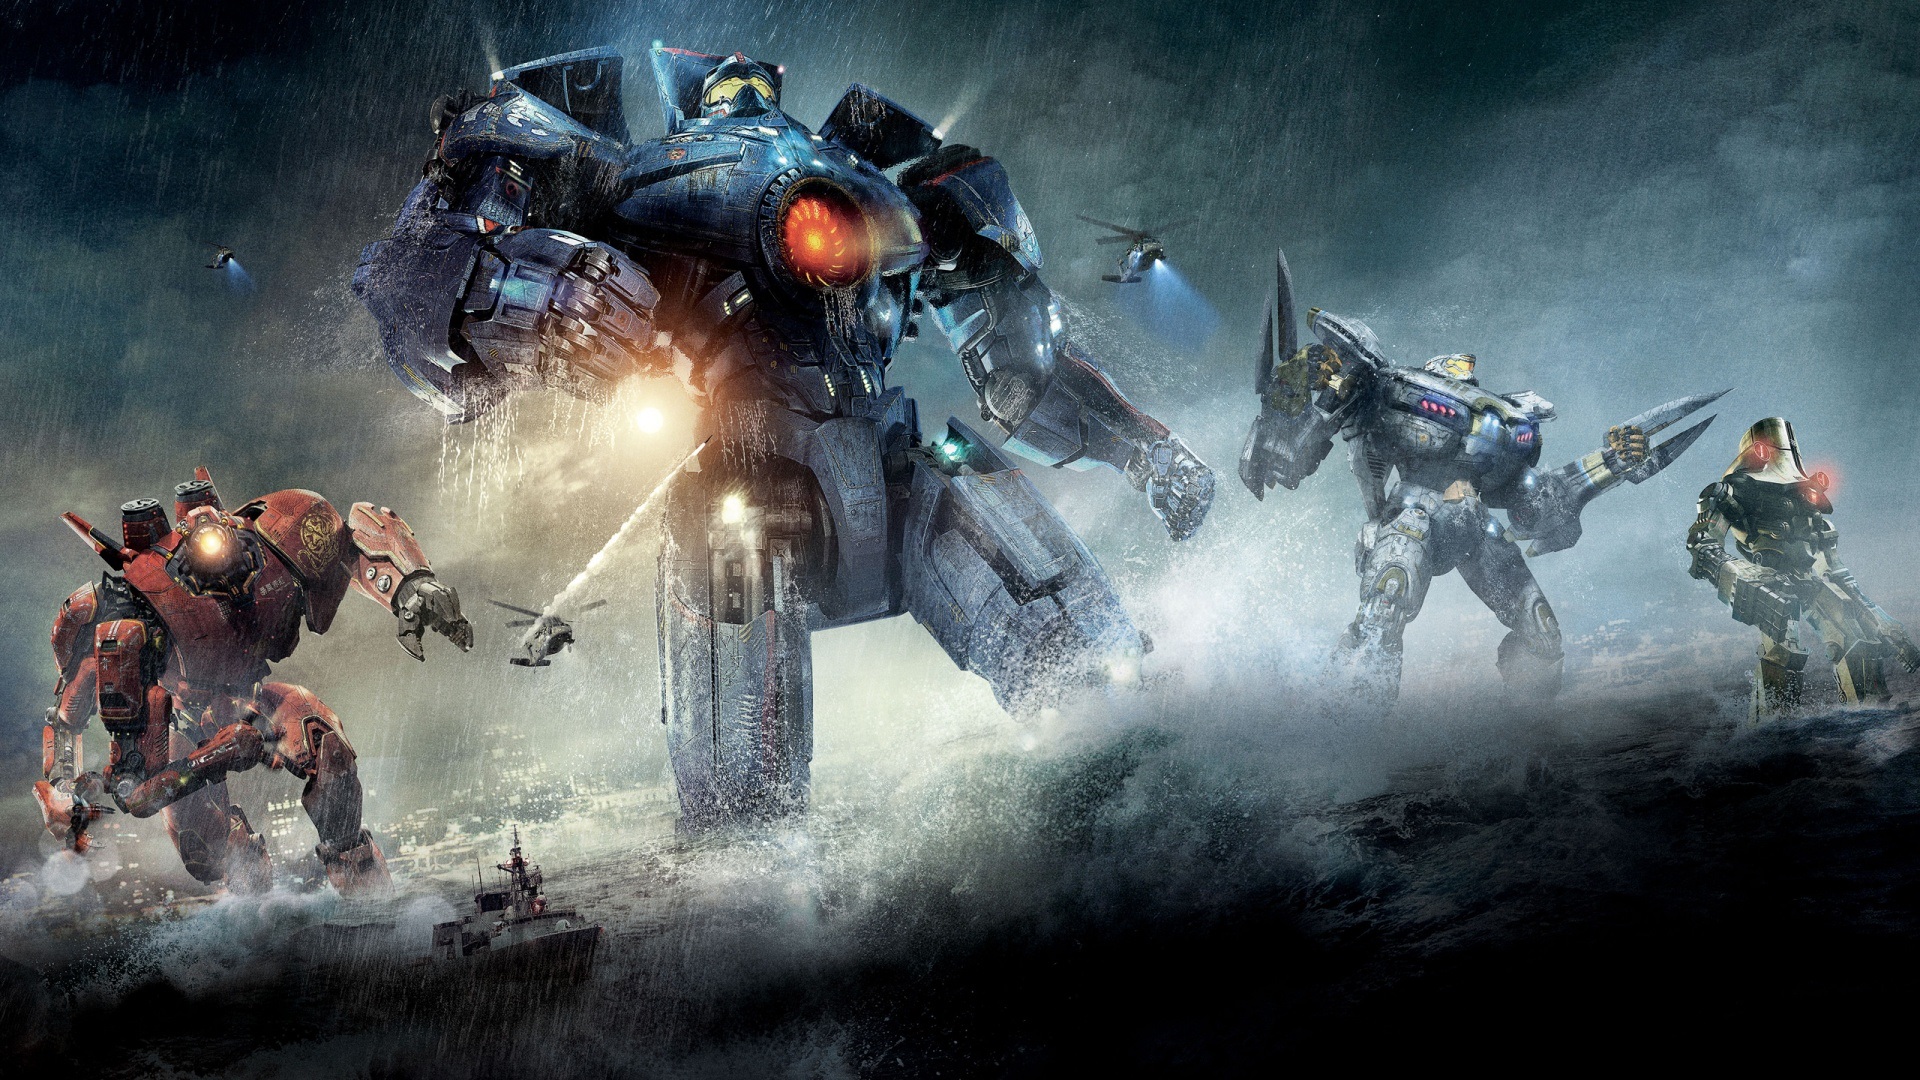 Jaegers go into battle - promotional artwork from Pacific Rim (2013)